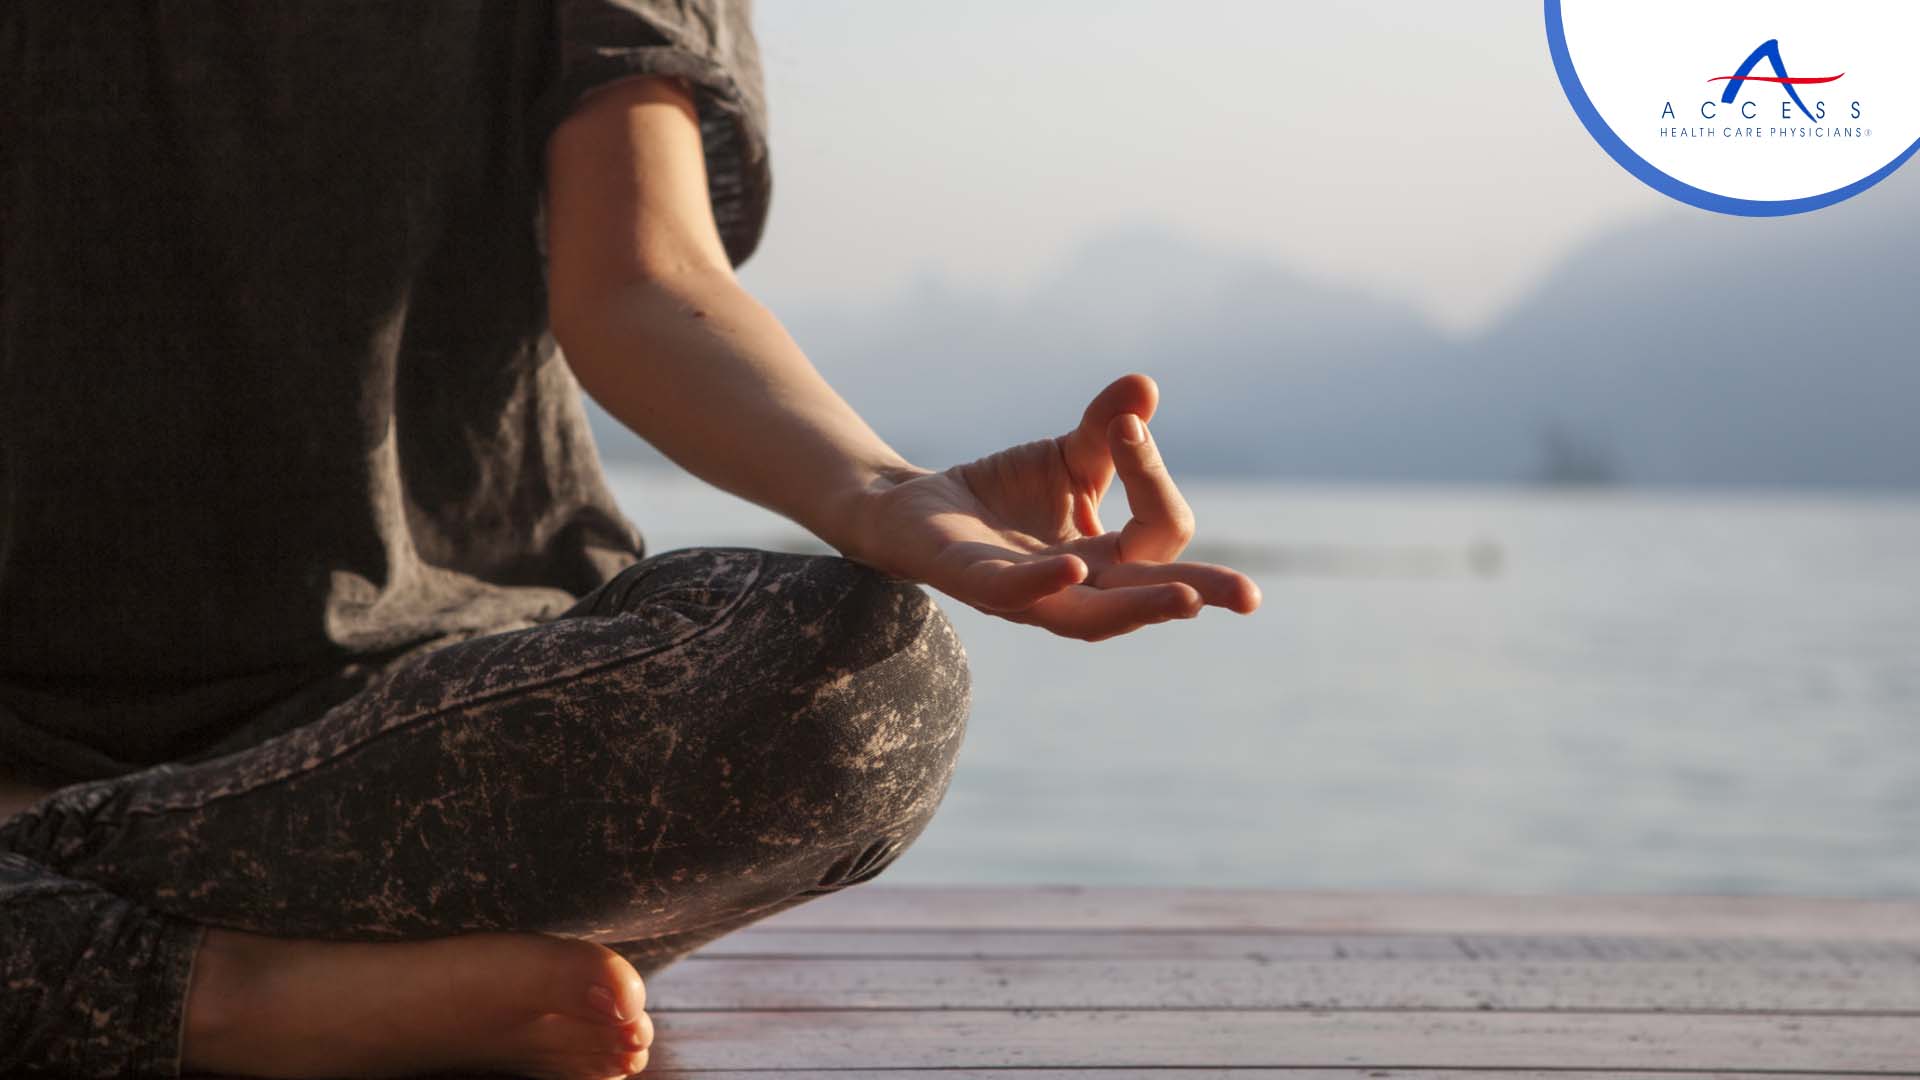 Applying Mindfulness to Your Daily Lifestyle